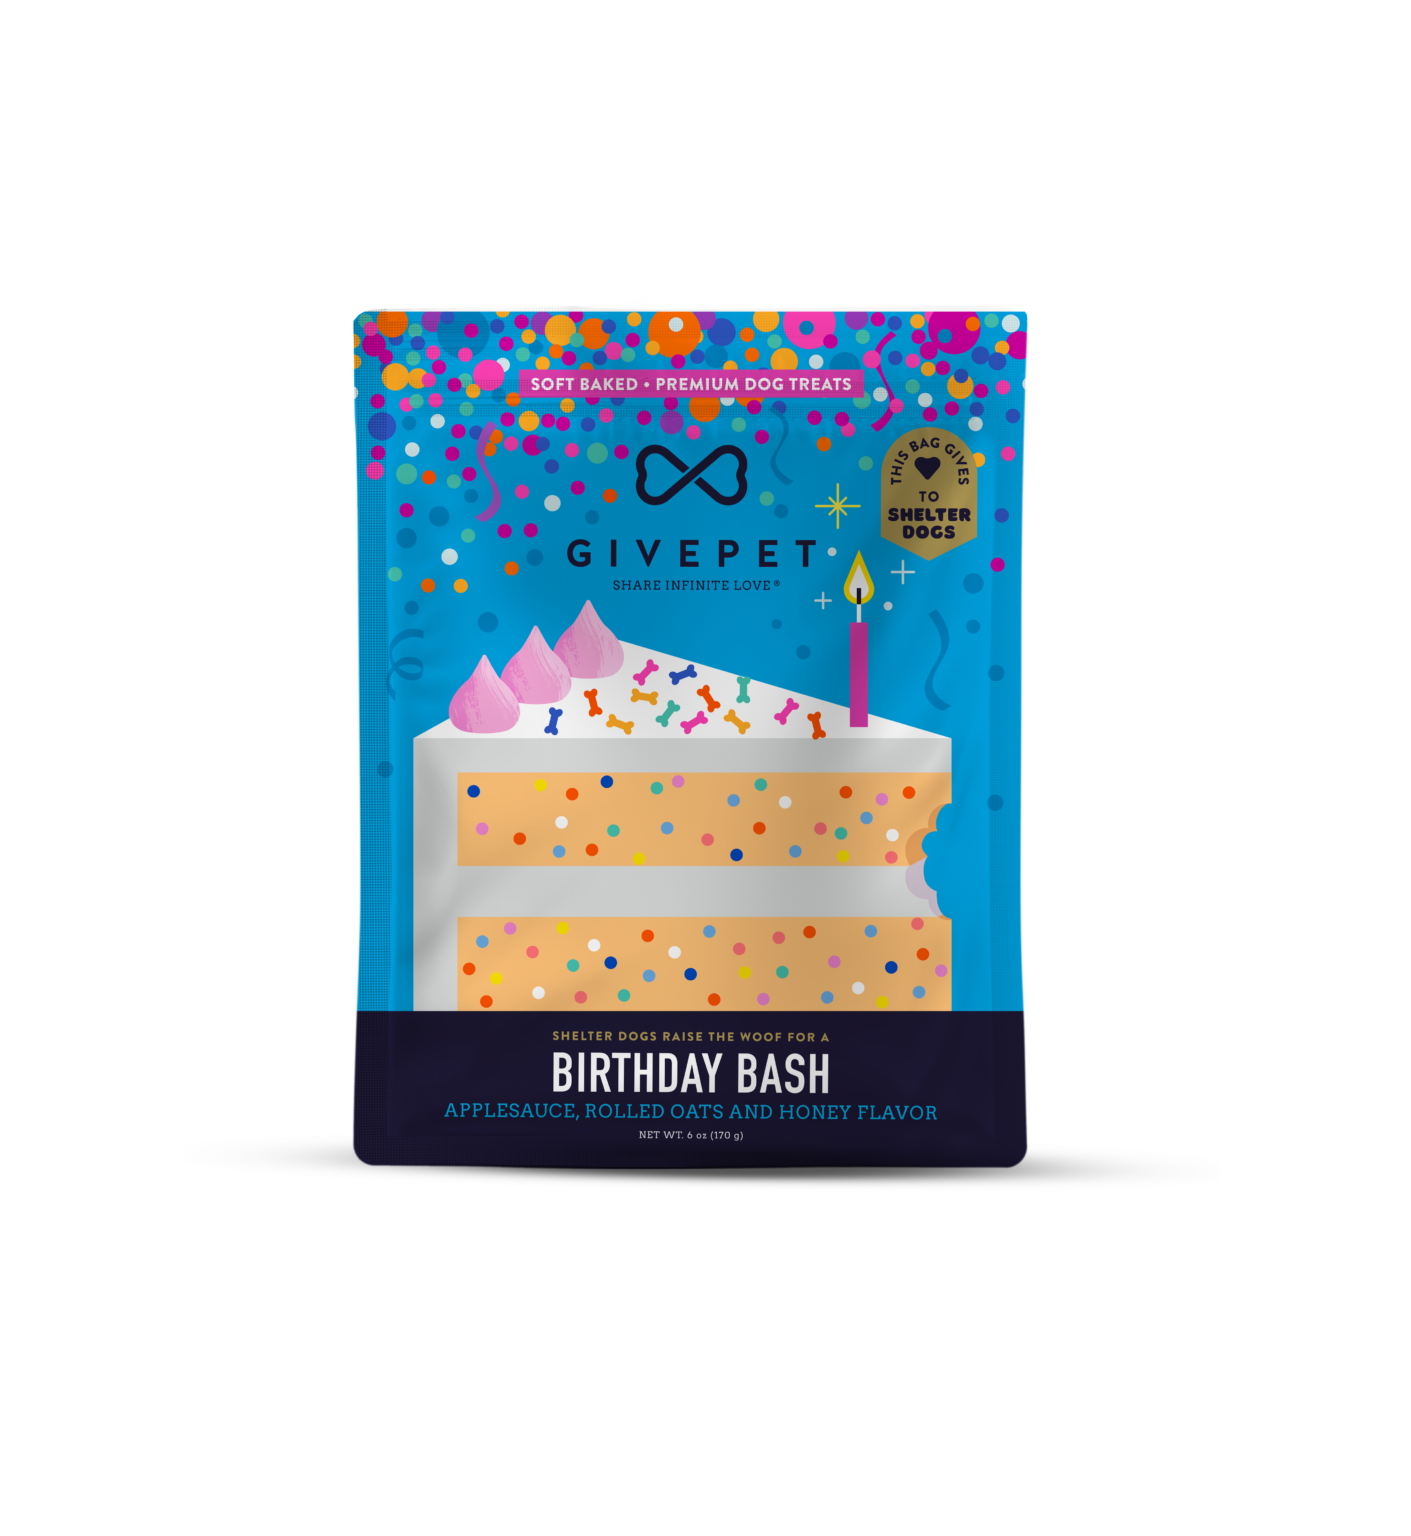 Give Pet Birthday Bash Soft Baked Treats for Dogs - Applesauce, Rolled Oats, Honey